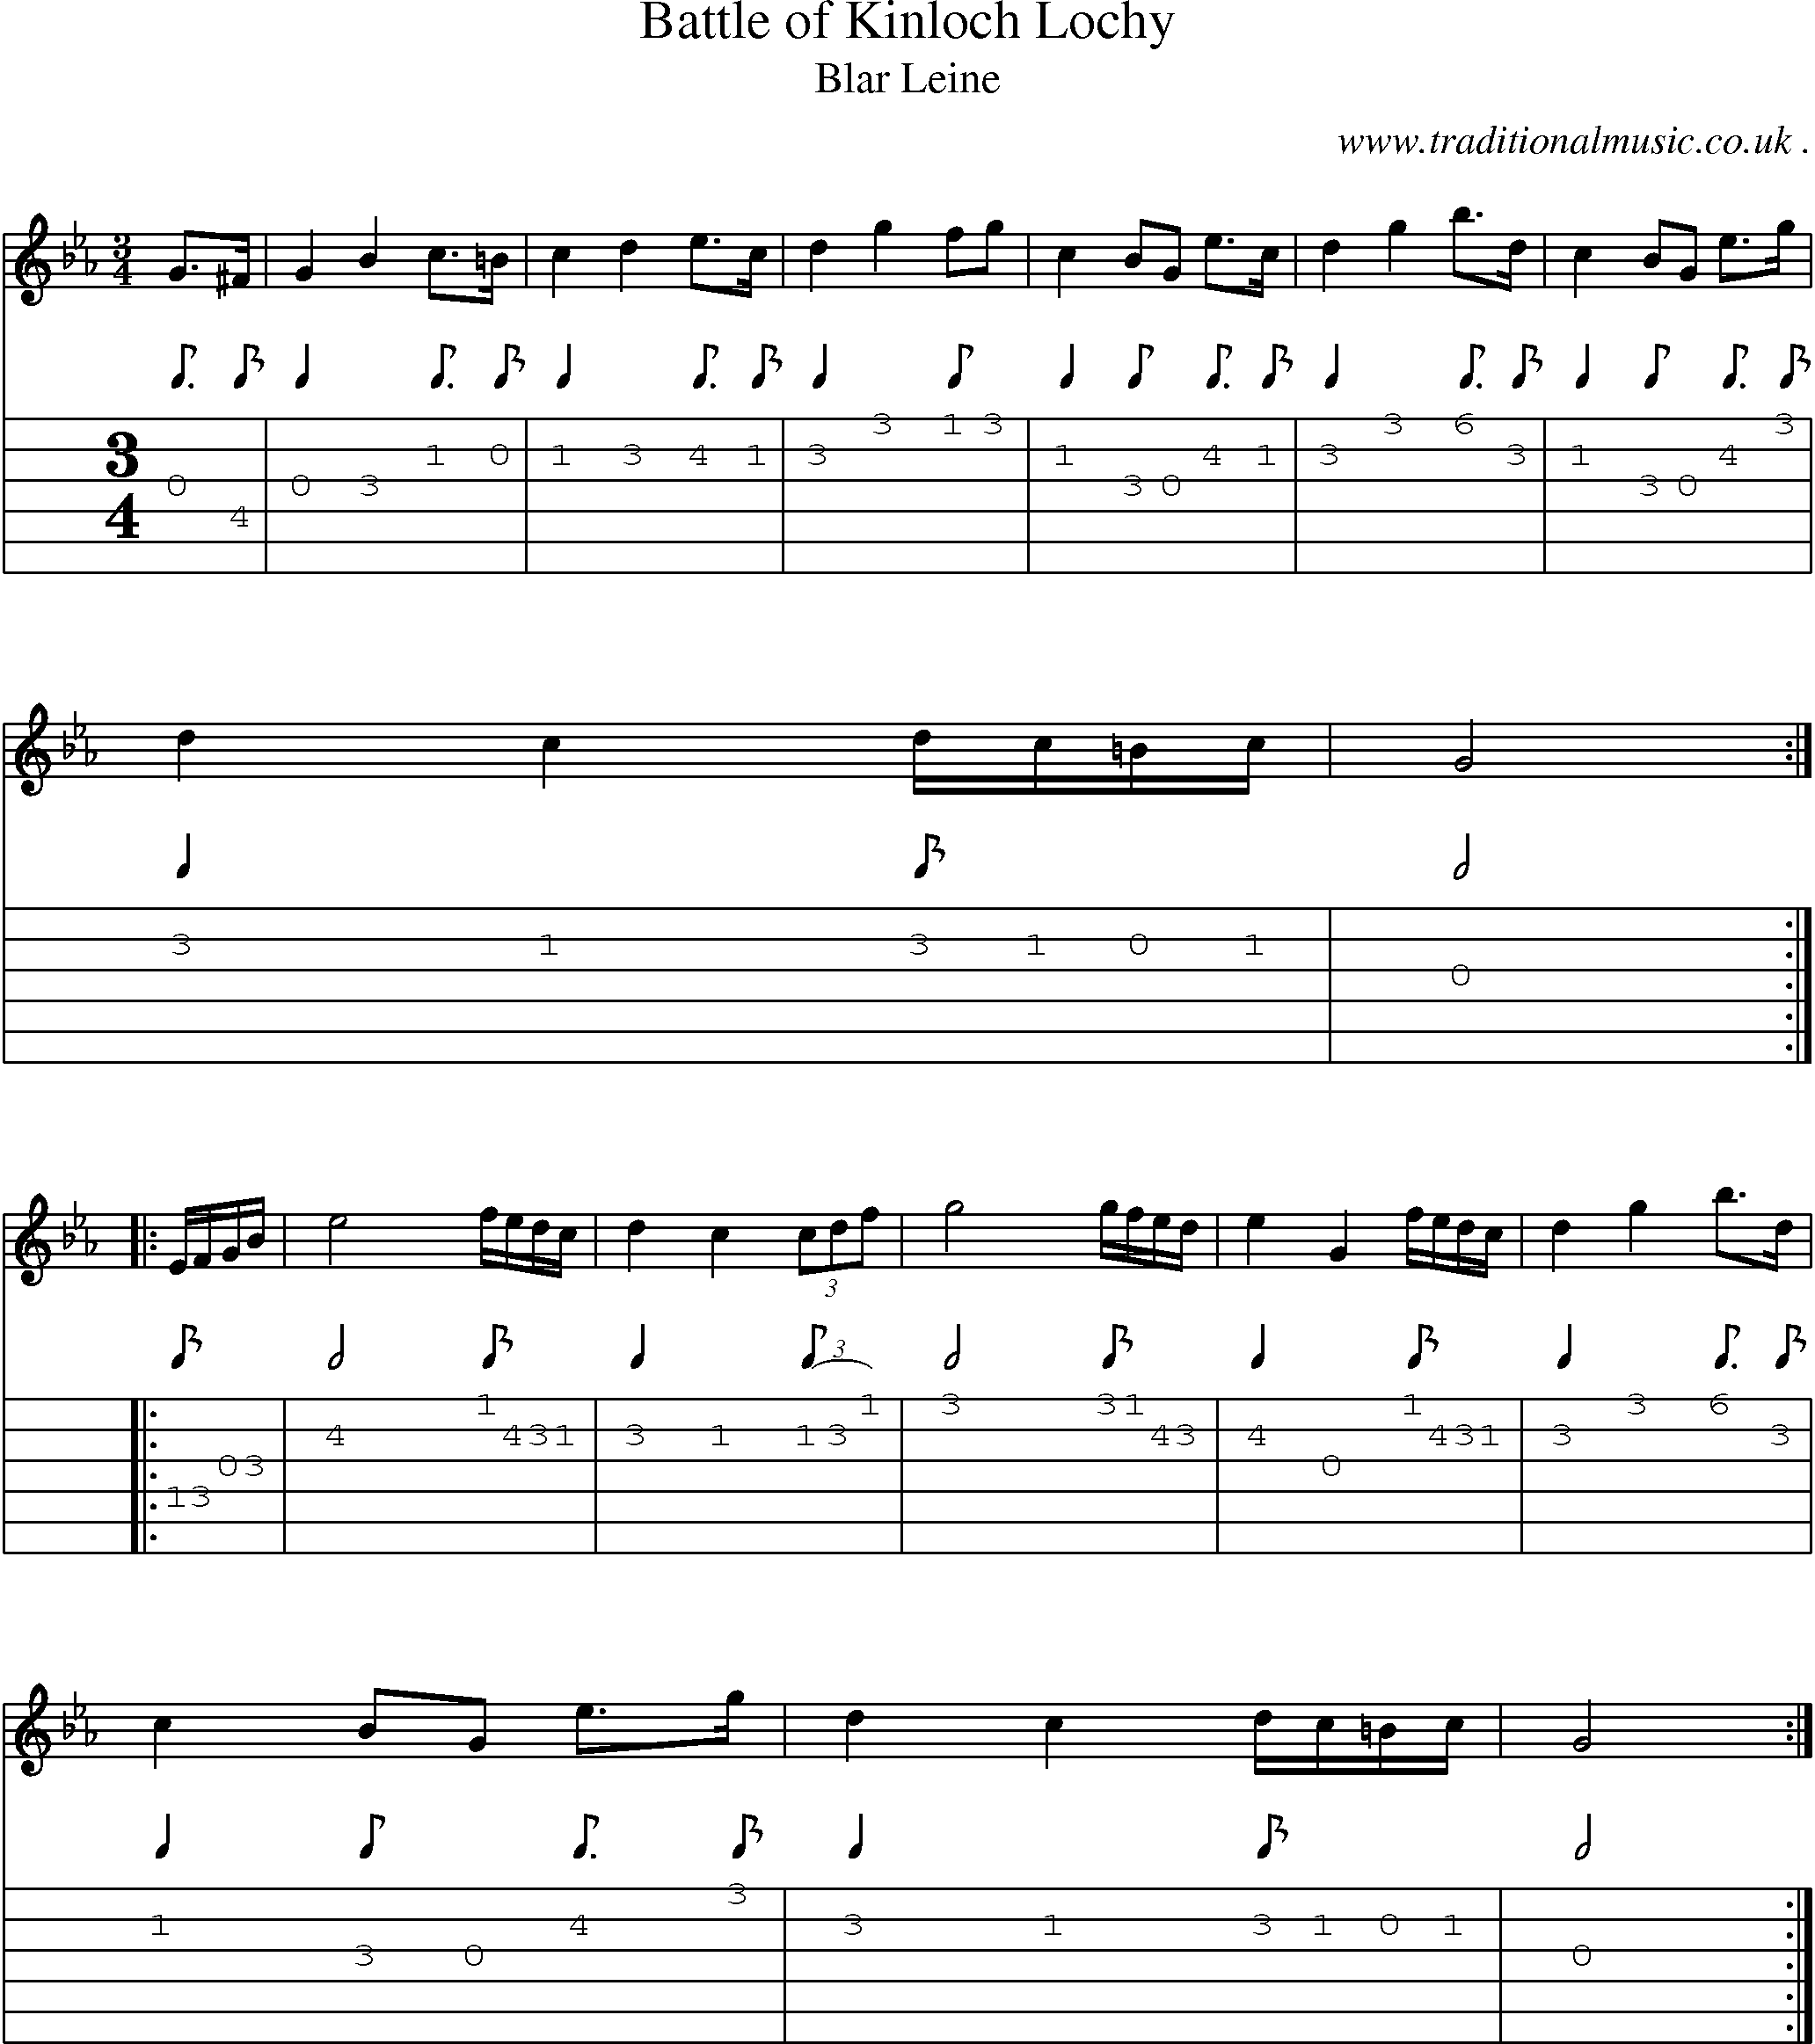 Sheet-music  score, Chords and Guitar Tabs for Battle Of Kinloch Lochy